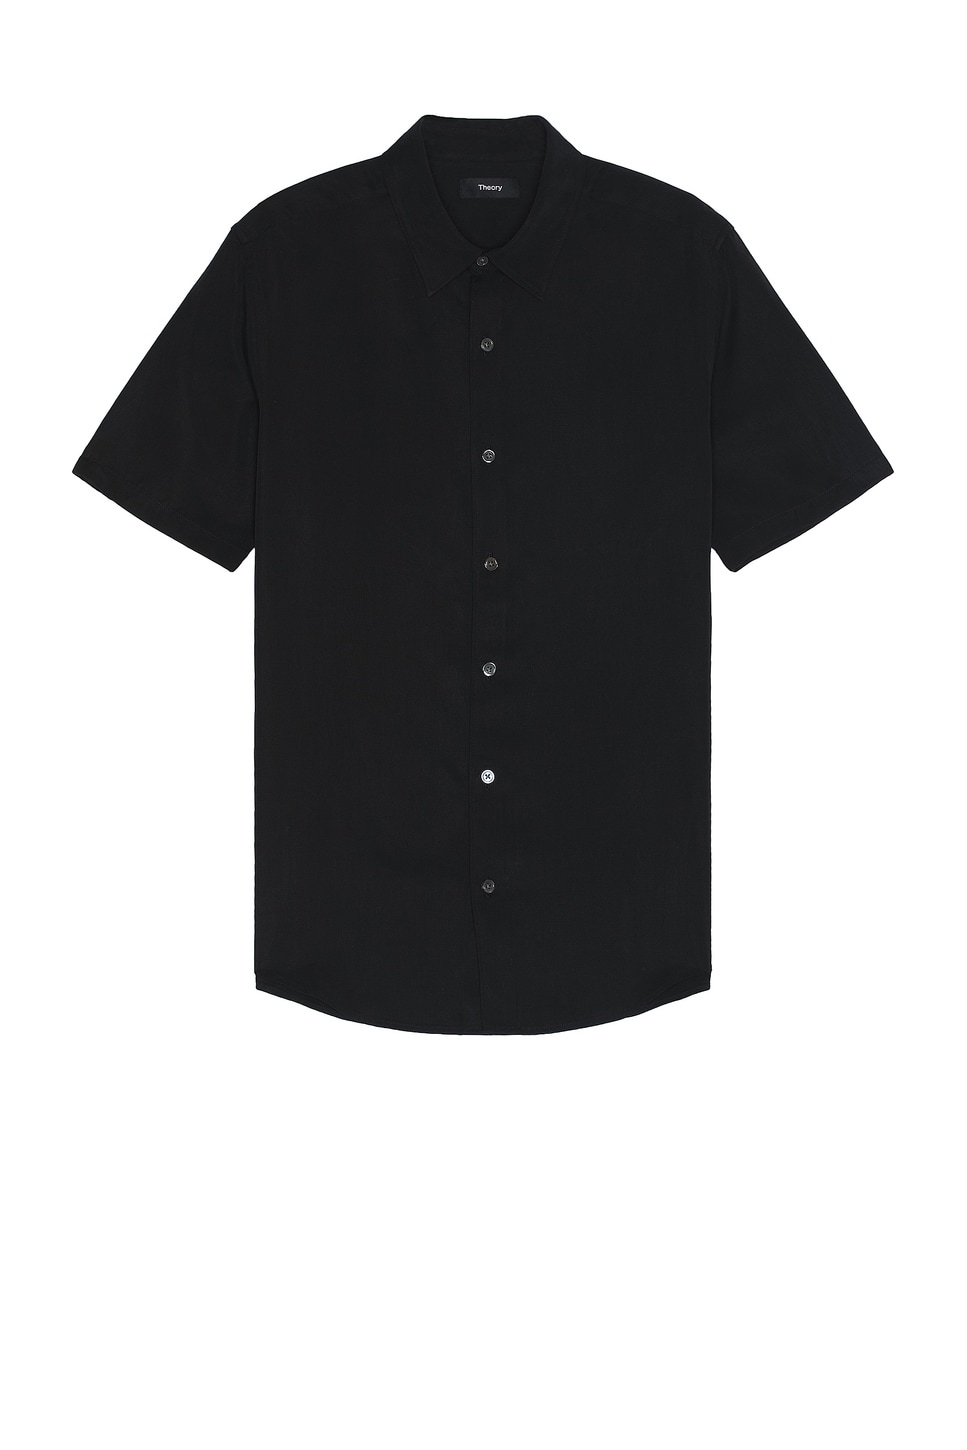 Image 1 of Theory Irving Short Sleeve Shirt in Black